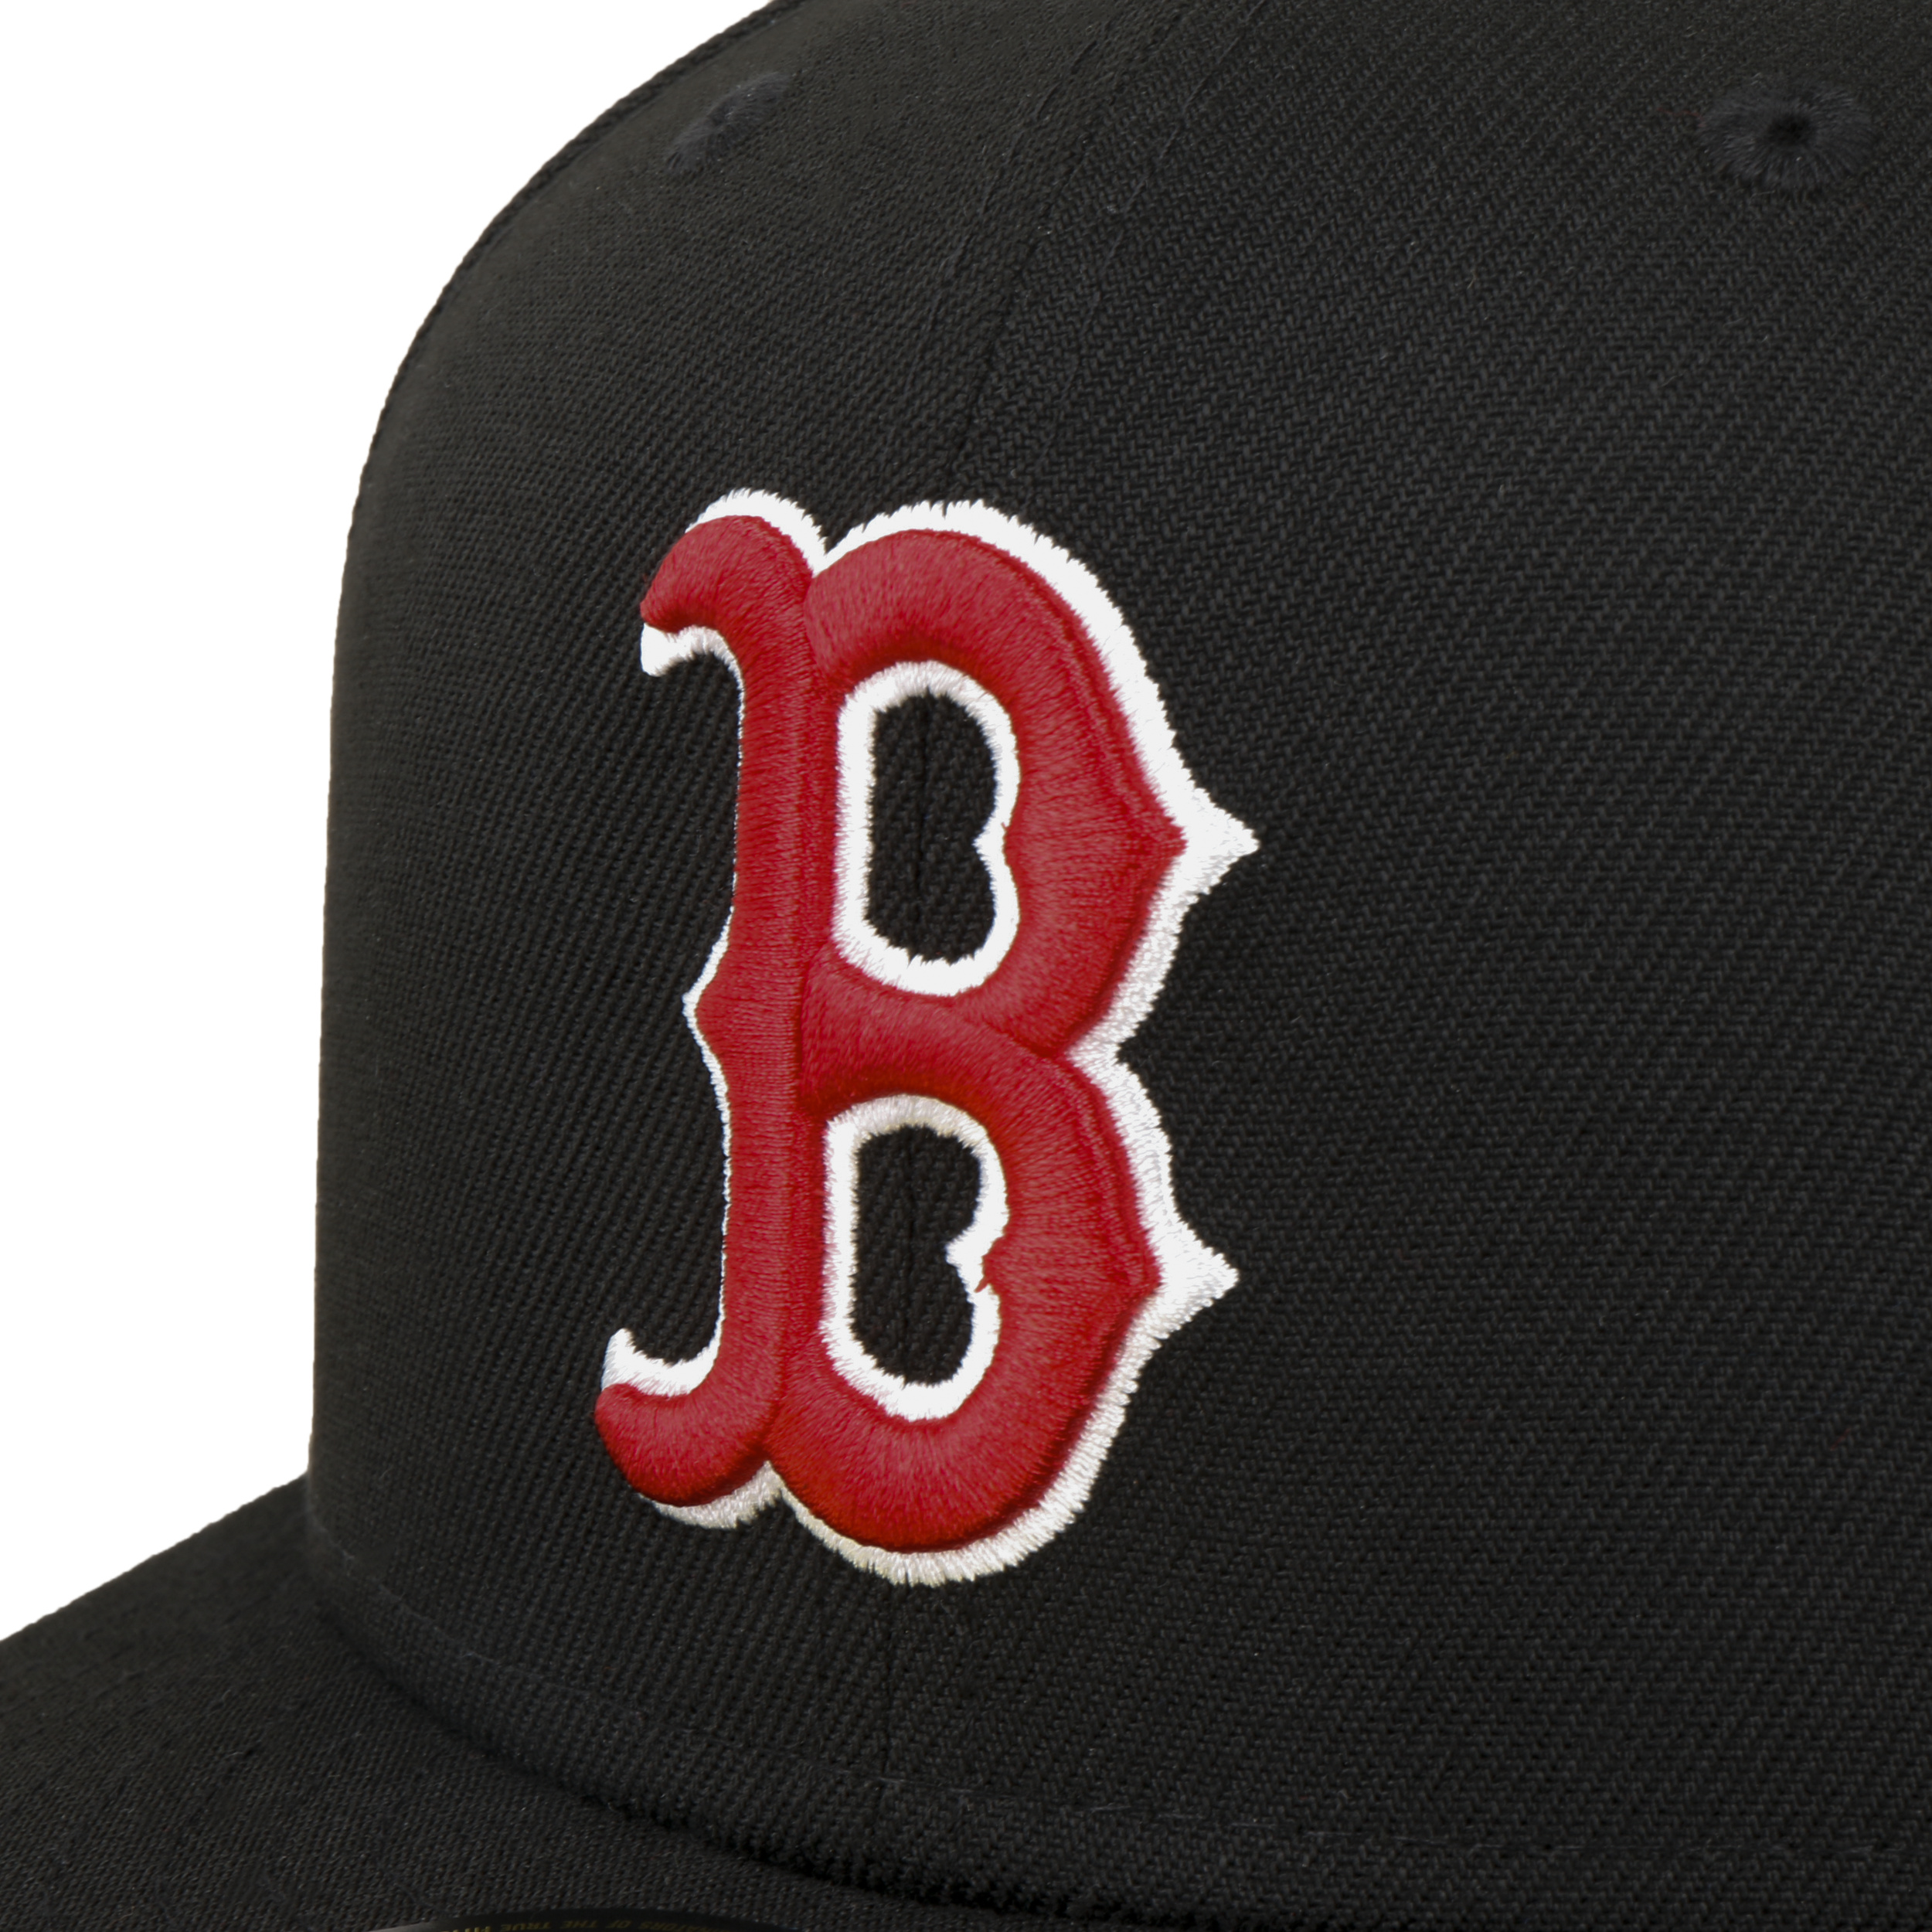 59Fifty MLB Repreve Red Sox Cap by New Era - 42,95 €